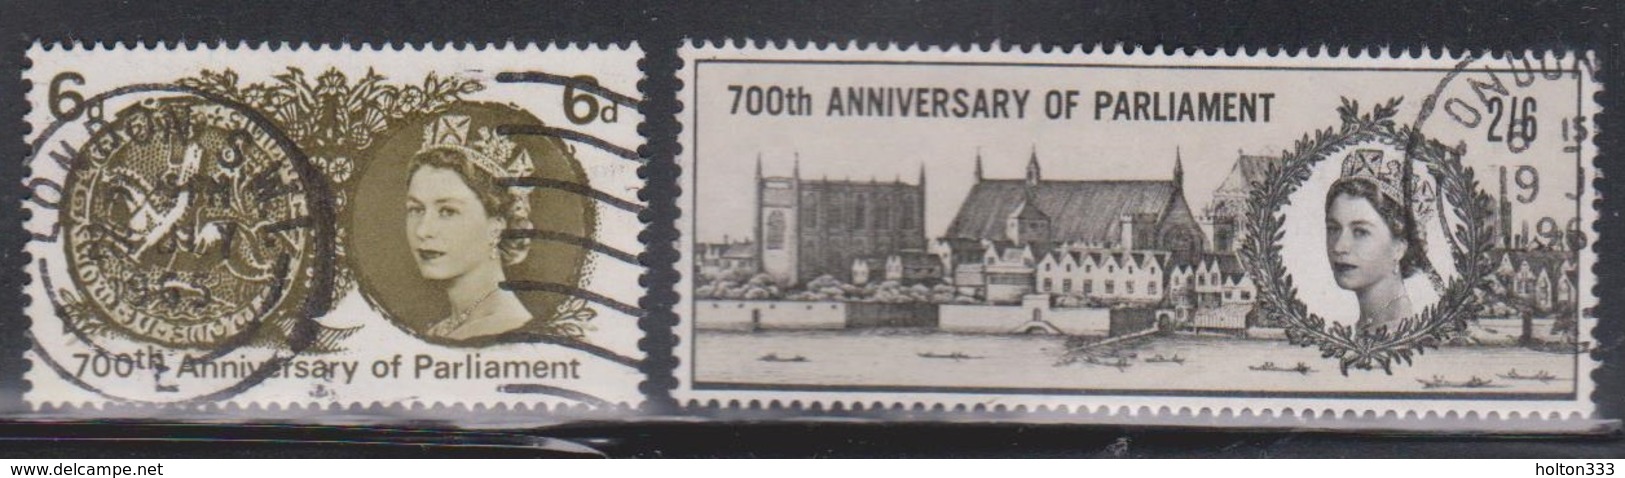 GREAT BRITAIN Scott # 422-3 Used - 700th Anniversary Of Parliament - Used Stamps